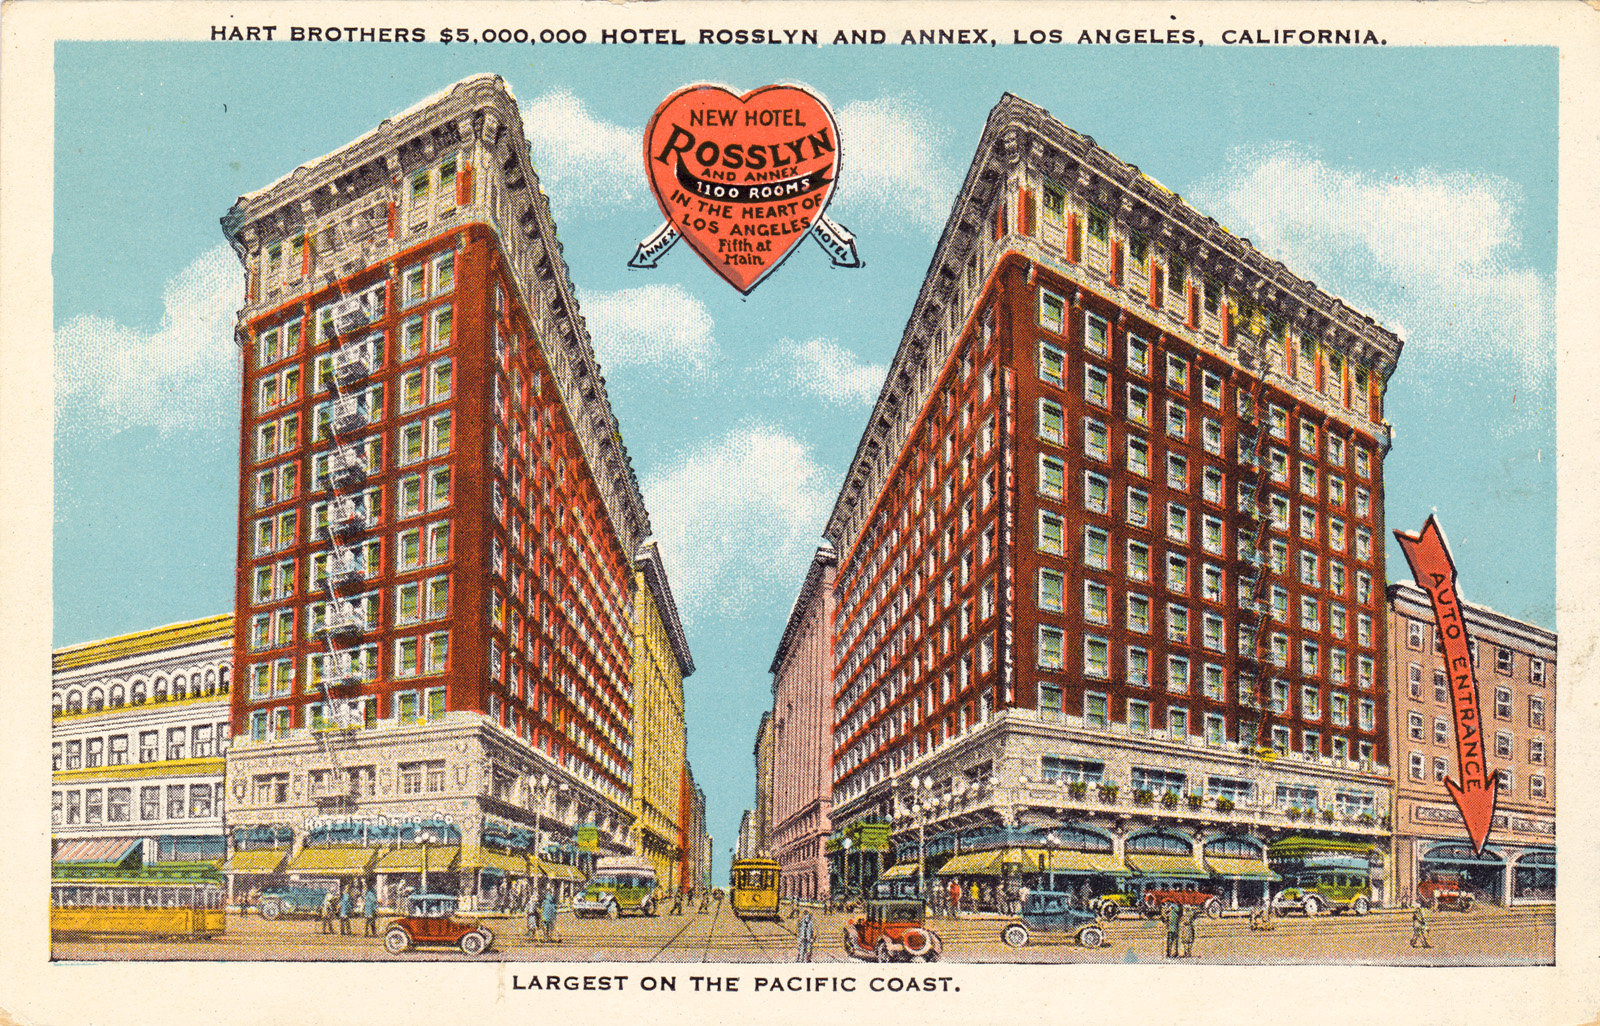 Postcard of the Rosslyn Hotel, still remaining in downtown Los Angeles as affordable housing.